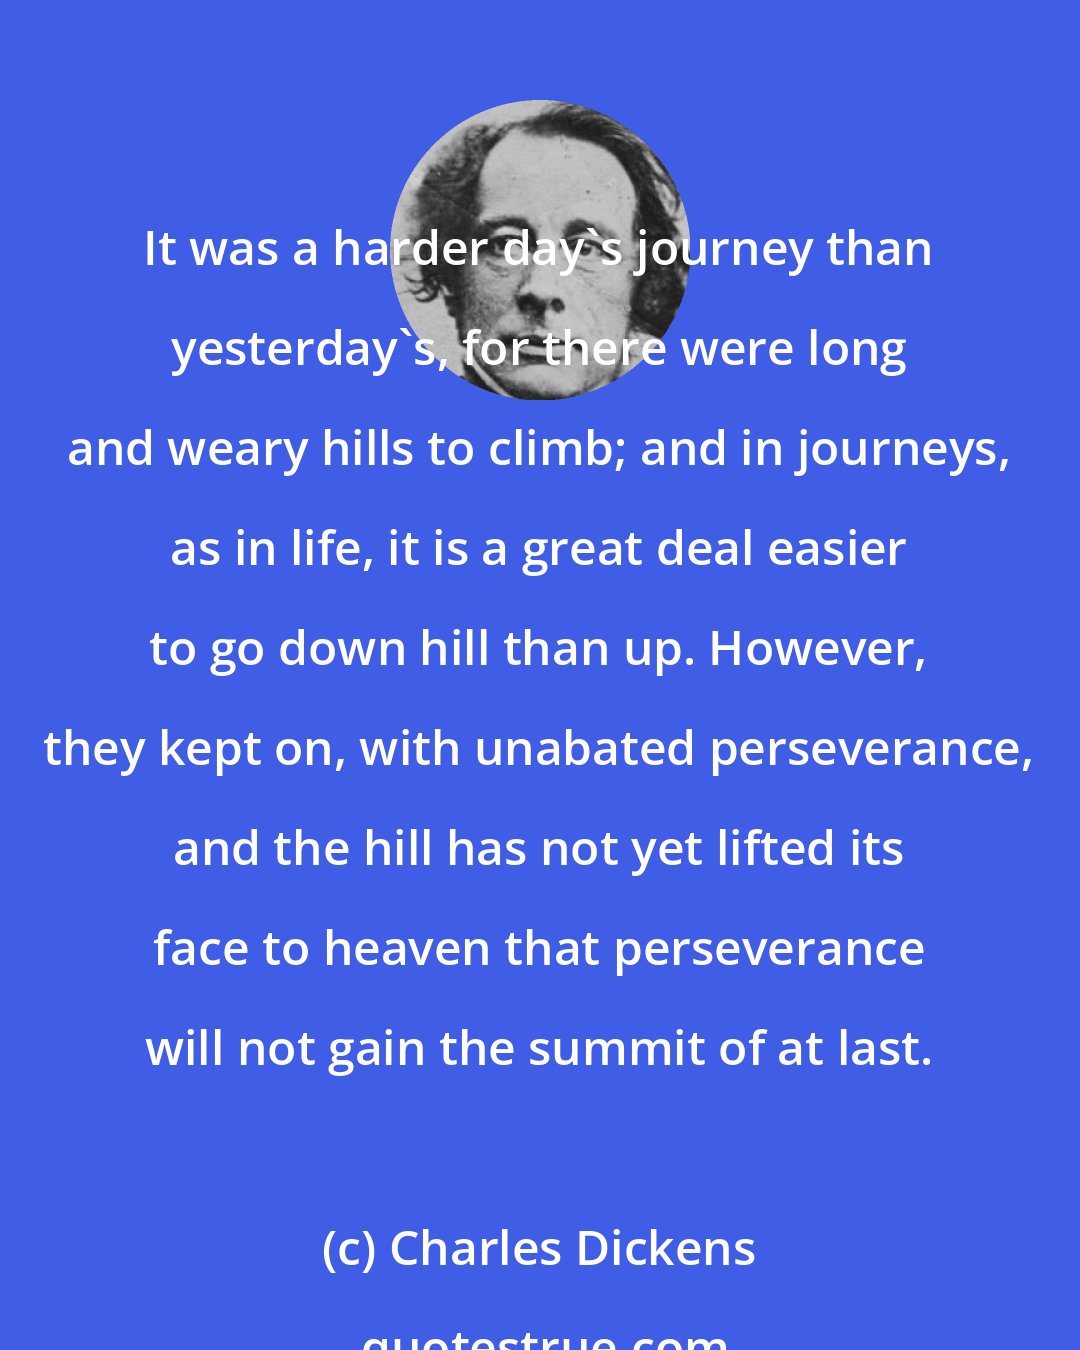 Charles Dickens: It was a harder day's journey than yesterday's, for there were long and weary hills to climb; and in journeys, as in life, it is a great deal easier to go down hill than up. However, they kept on, with unabated perseverance, and the hill has not yet lifted its face to heaven that perseverance will not gain the summit of at last.